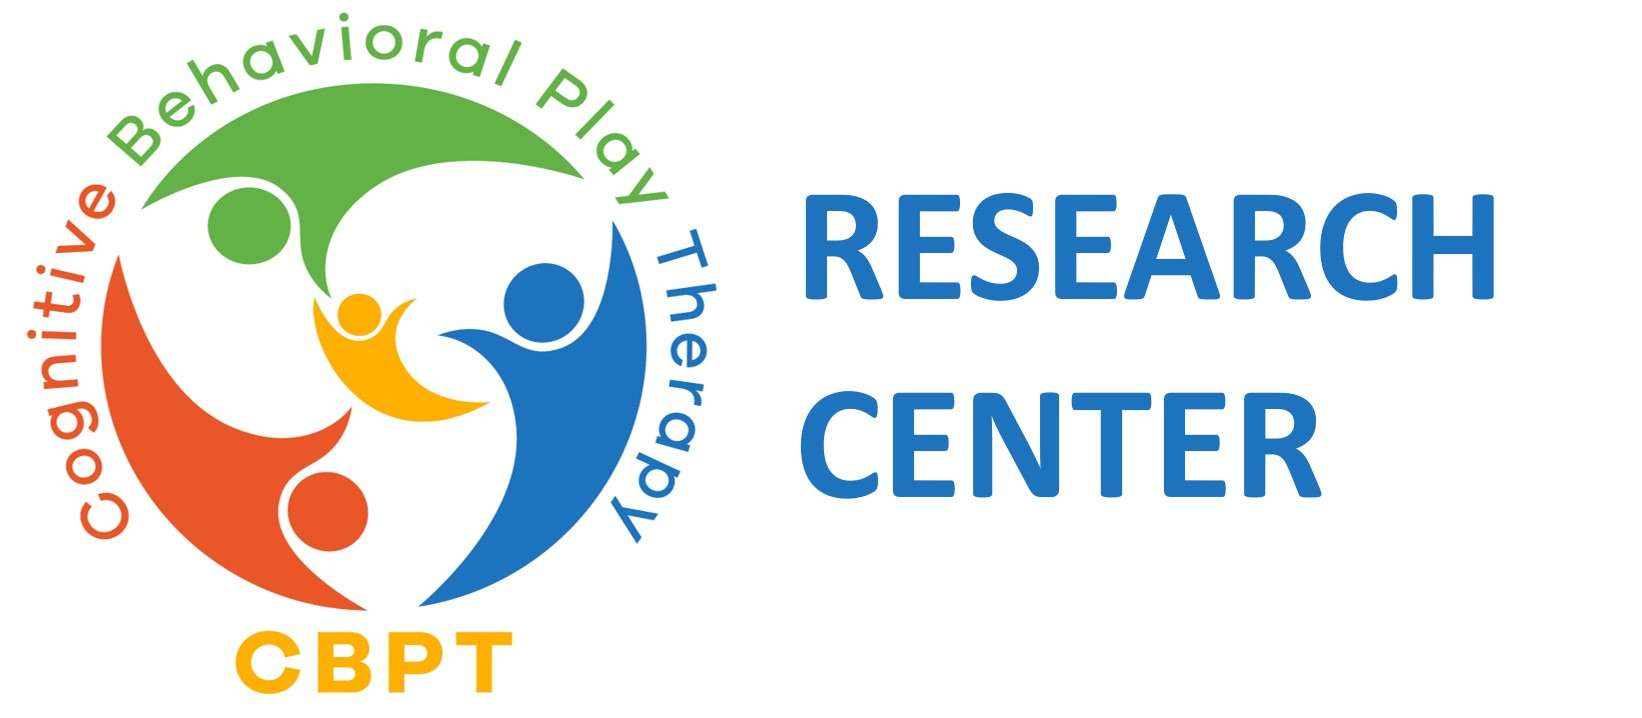 Services, CBPT RESEARCH CENTER: what it is and what it does, Cognitive Behavioral Play Therapy